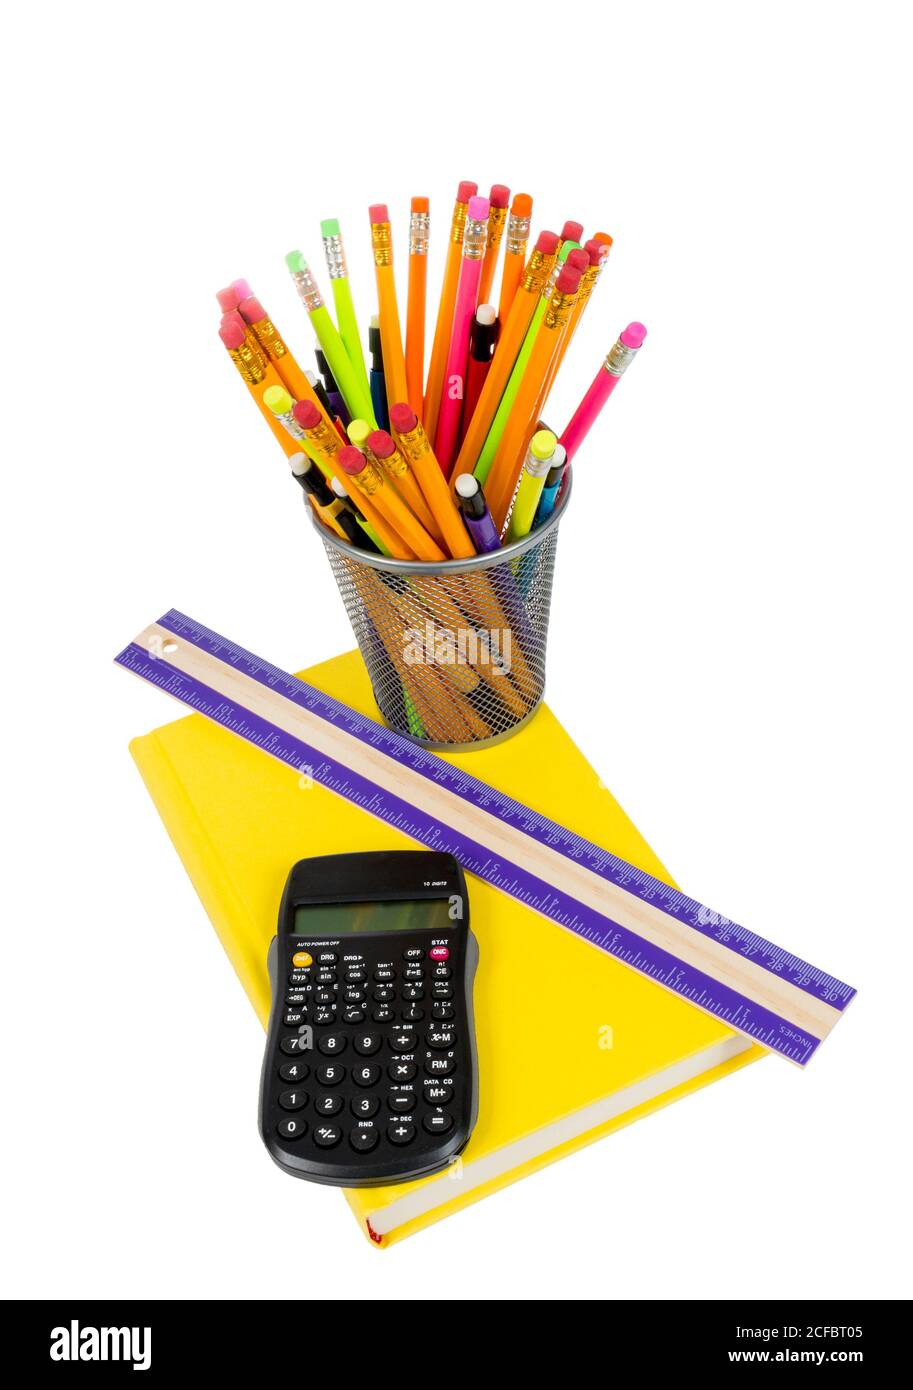 Vertical photograph of a rainbow color of pencils in pencil holder, with brightly colored yellow book, ruler and calculator. Isolated on a white backg Stock Photo